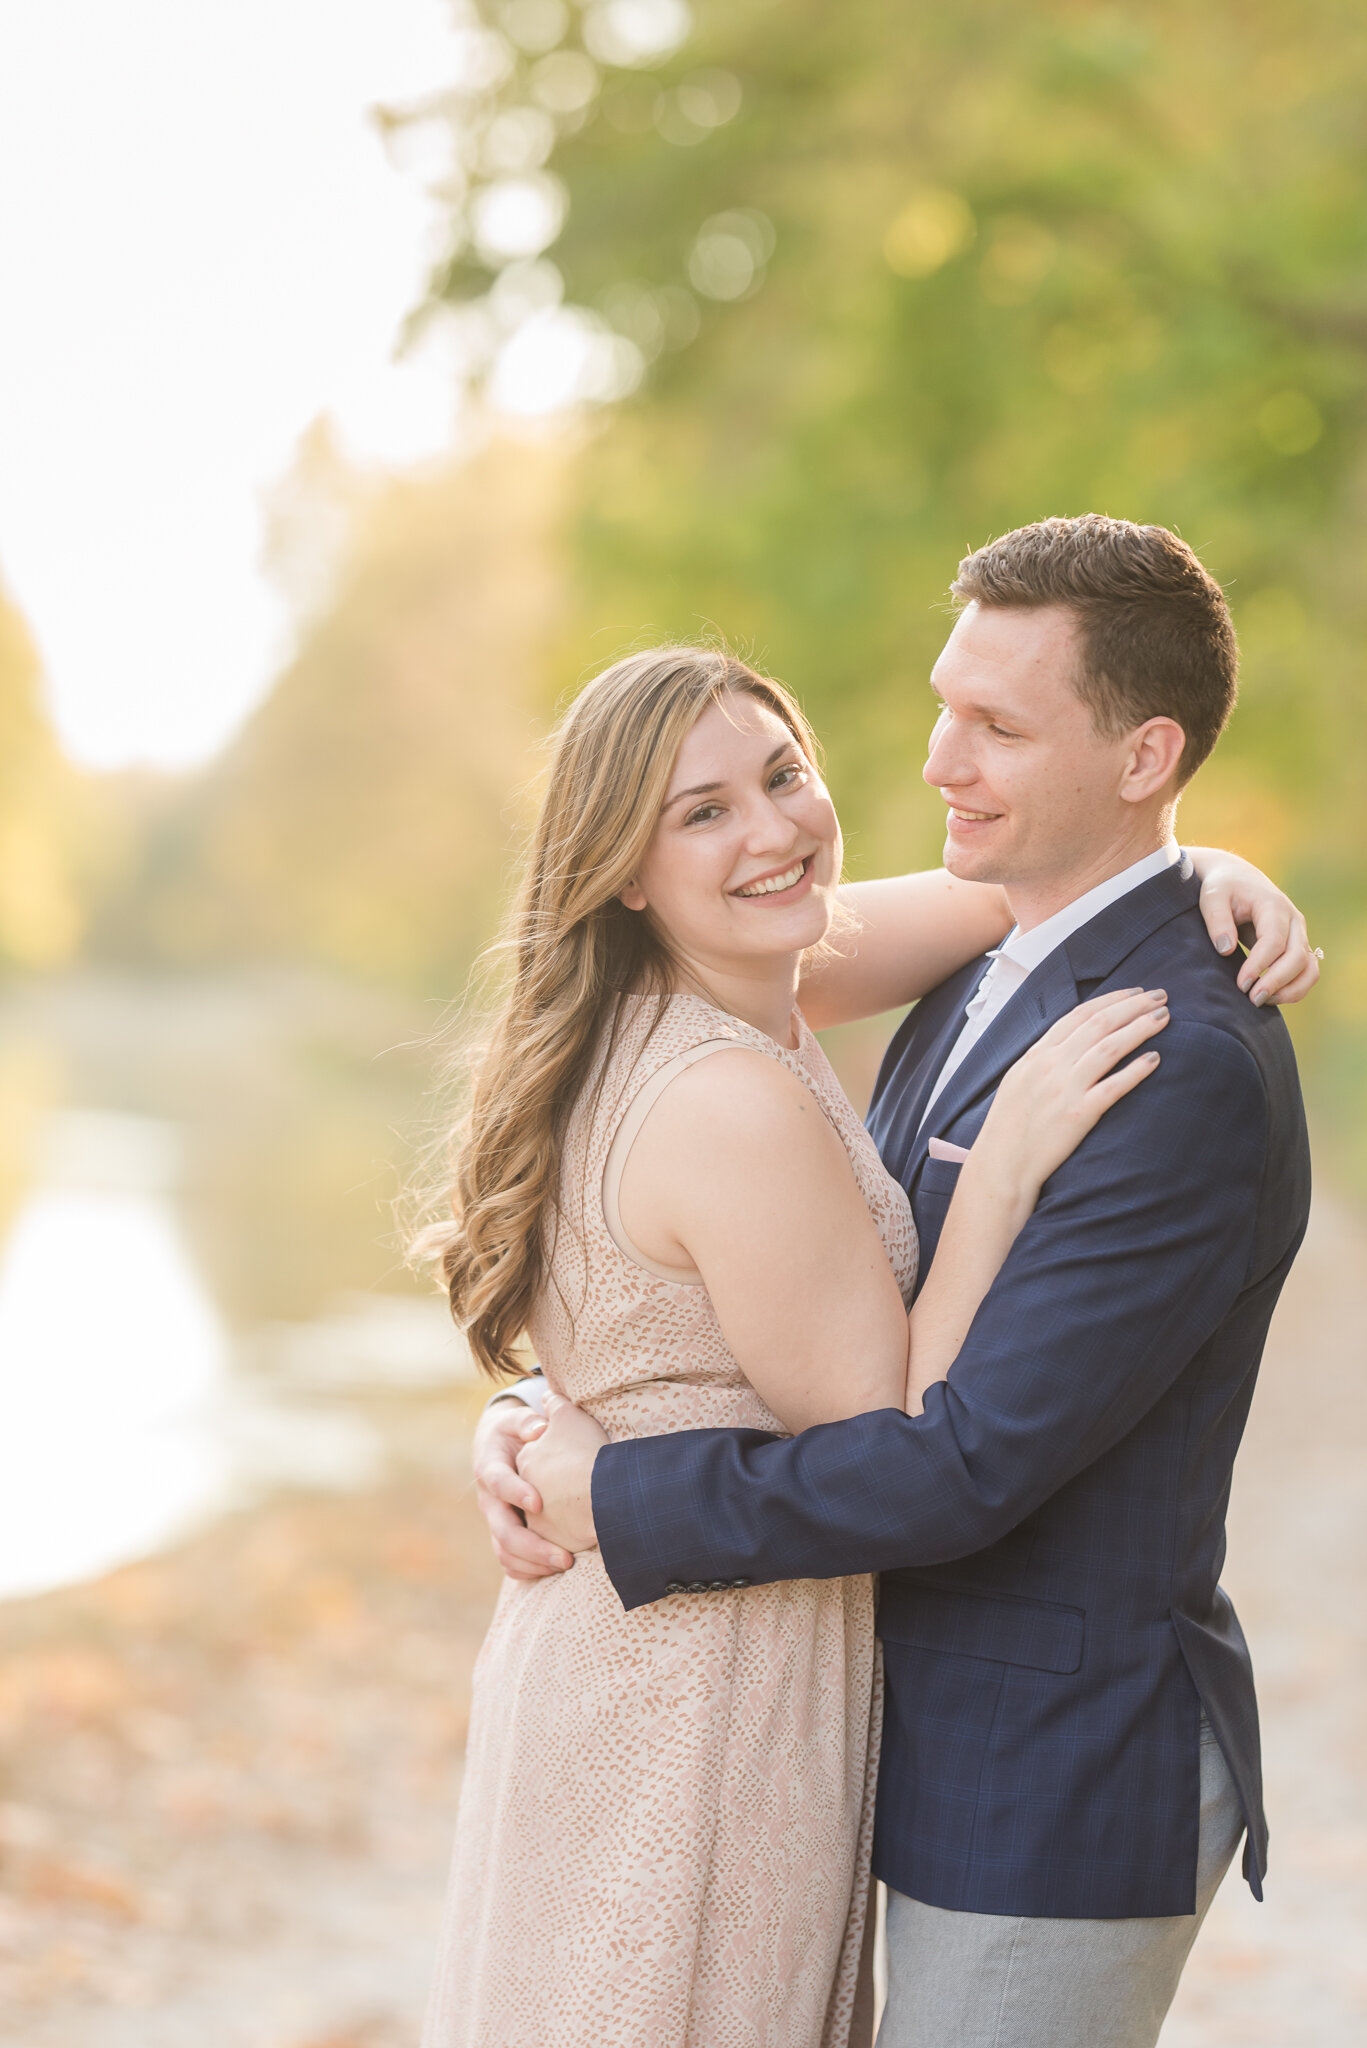 October Engagement Session at Holcomb Gardens2817.jpg